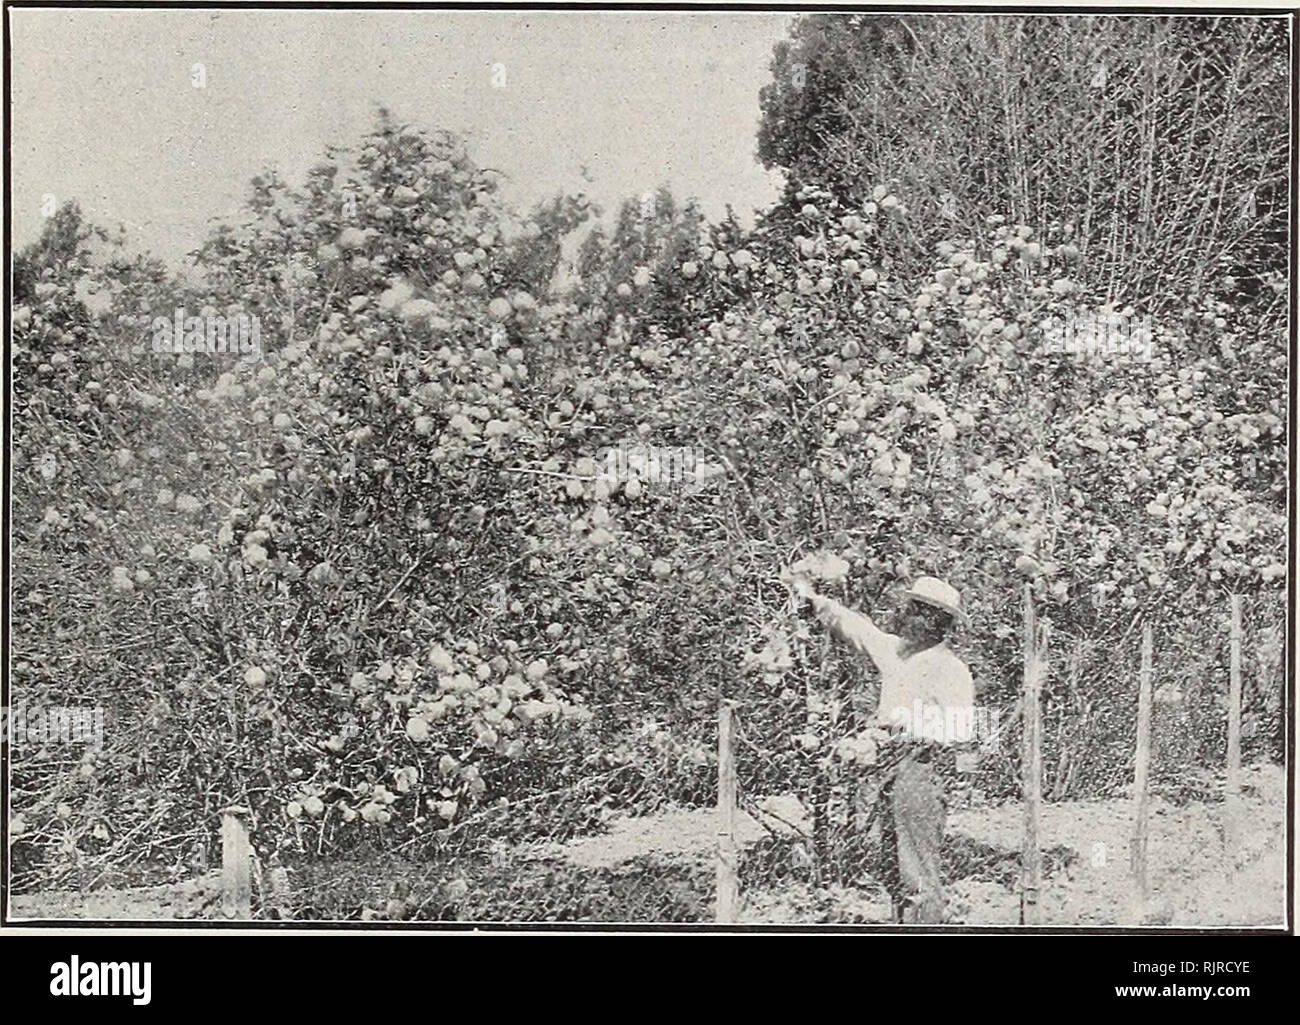 . Autumn 1903 catalog tells when to plant, and how to grow : bulbs imported and native plants greenhouse and garden seeds seasonable specialties. Nursery stock Catalogs; Seeds Catalogs; Gardening Equipment and supplies Catalogs; Bulbs (Plants) Catalogs. Fall List of Plants 23 Pittosporum tobira - A very desirable sort; the foliage and stems are very stiff; flowers pure white, sweetly scented; of dwarf habit. 25c and 50c each. Pittosporum tobira variegatumâA variegated form of the preceding. 35c each. Pittosporum undulatumâFlowers sweetly scented; very desirable. 15c each; $1 00 per ten. Polyga Stock Photo